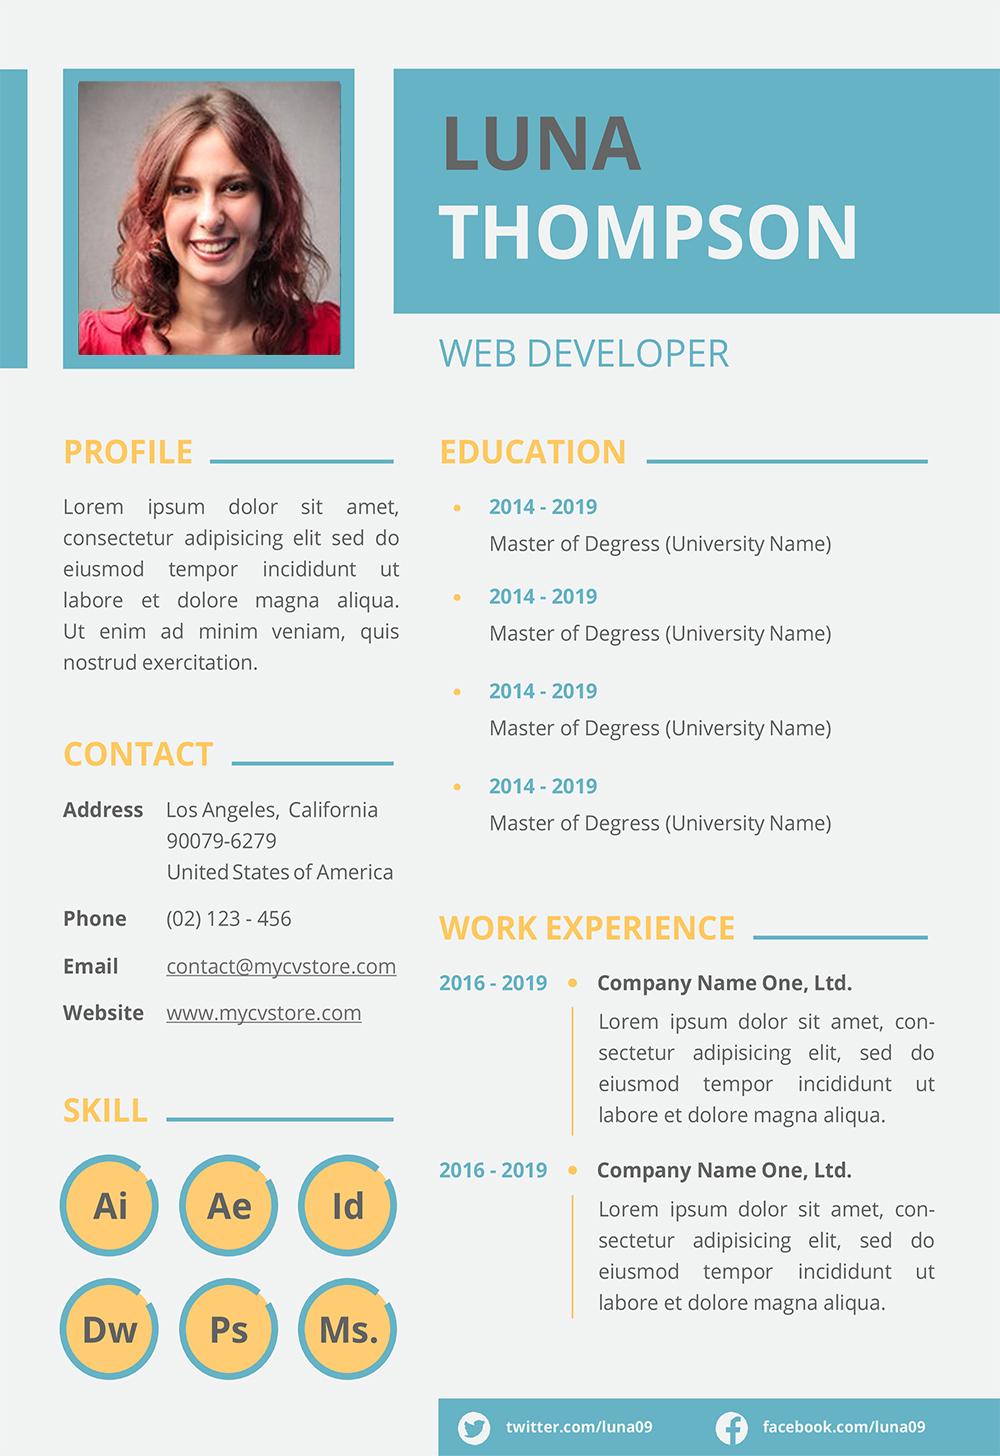 free resume templates word download for counselors